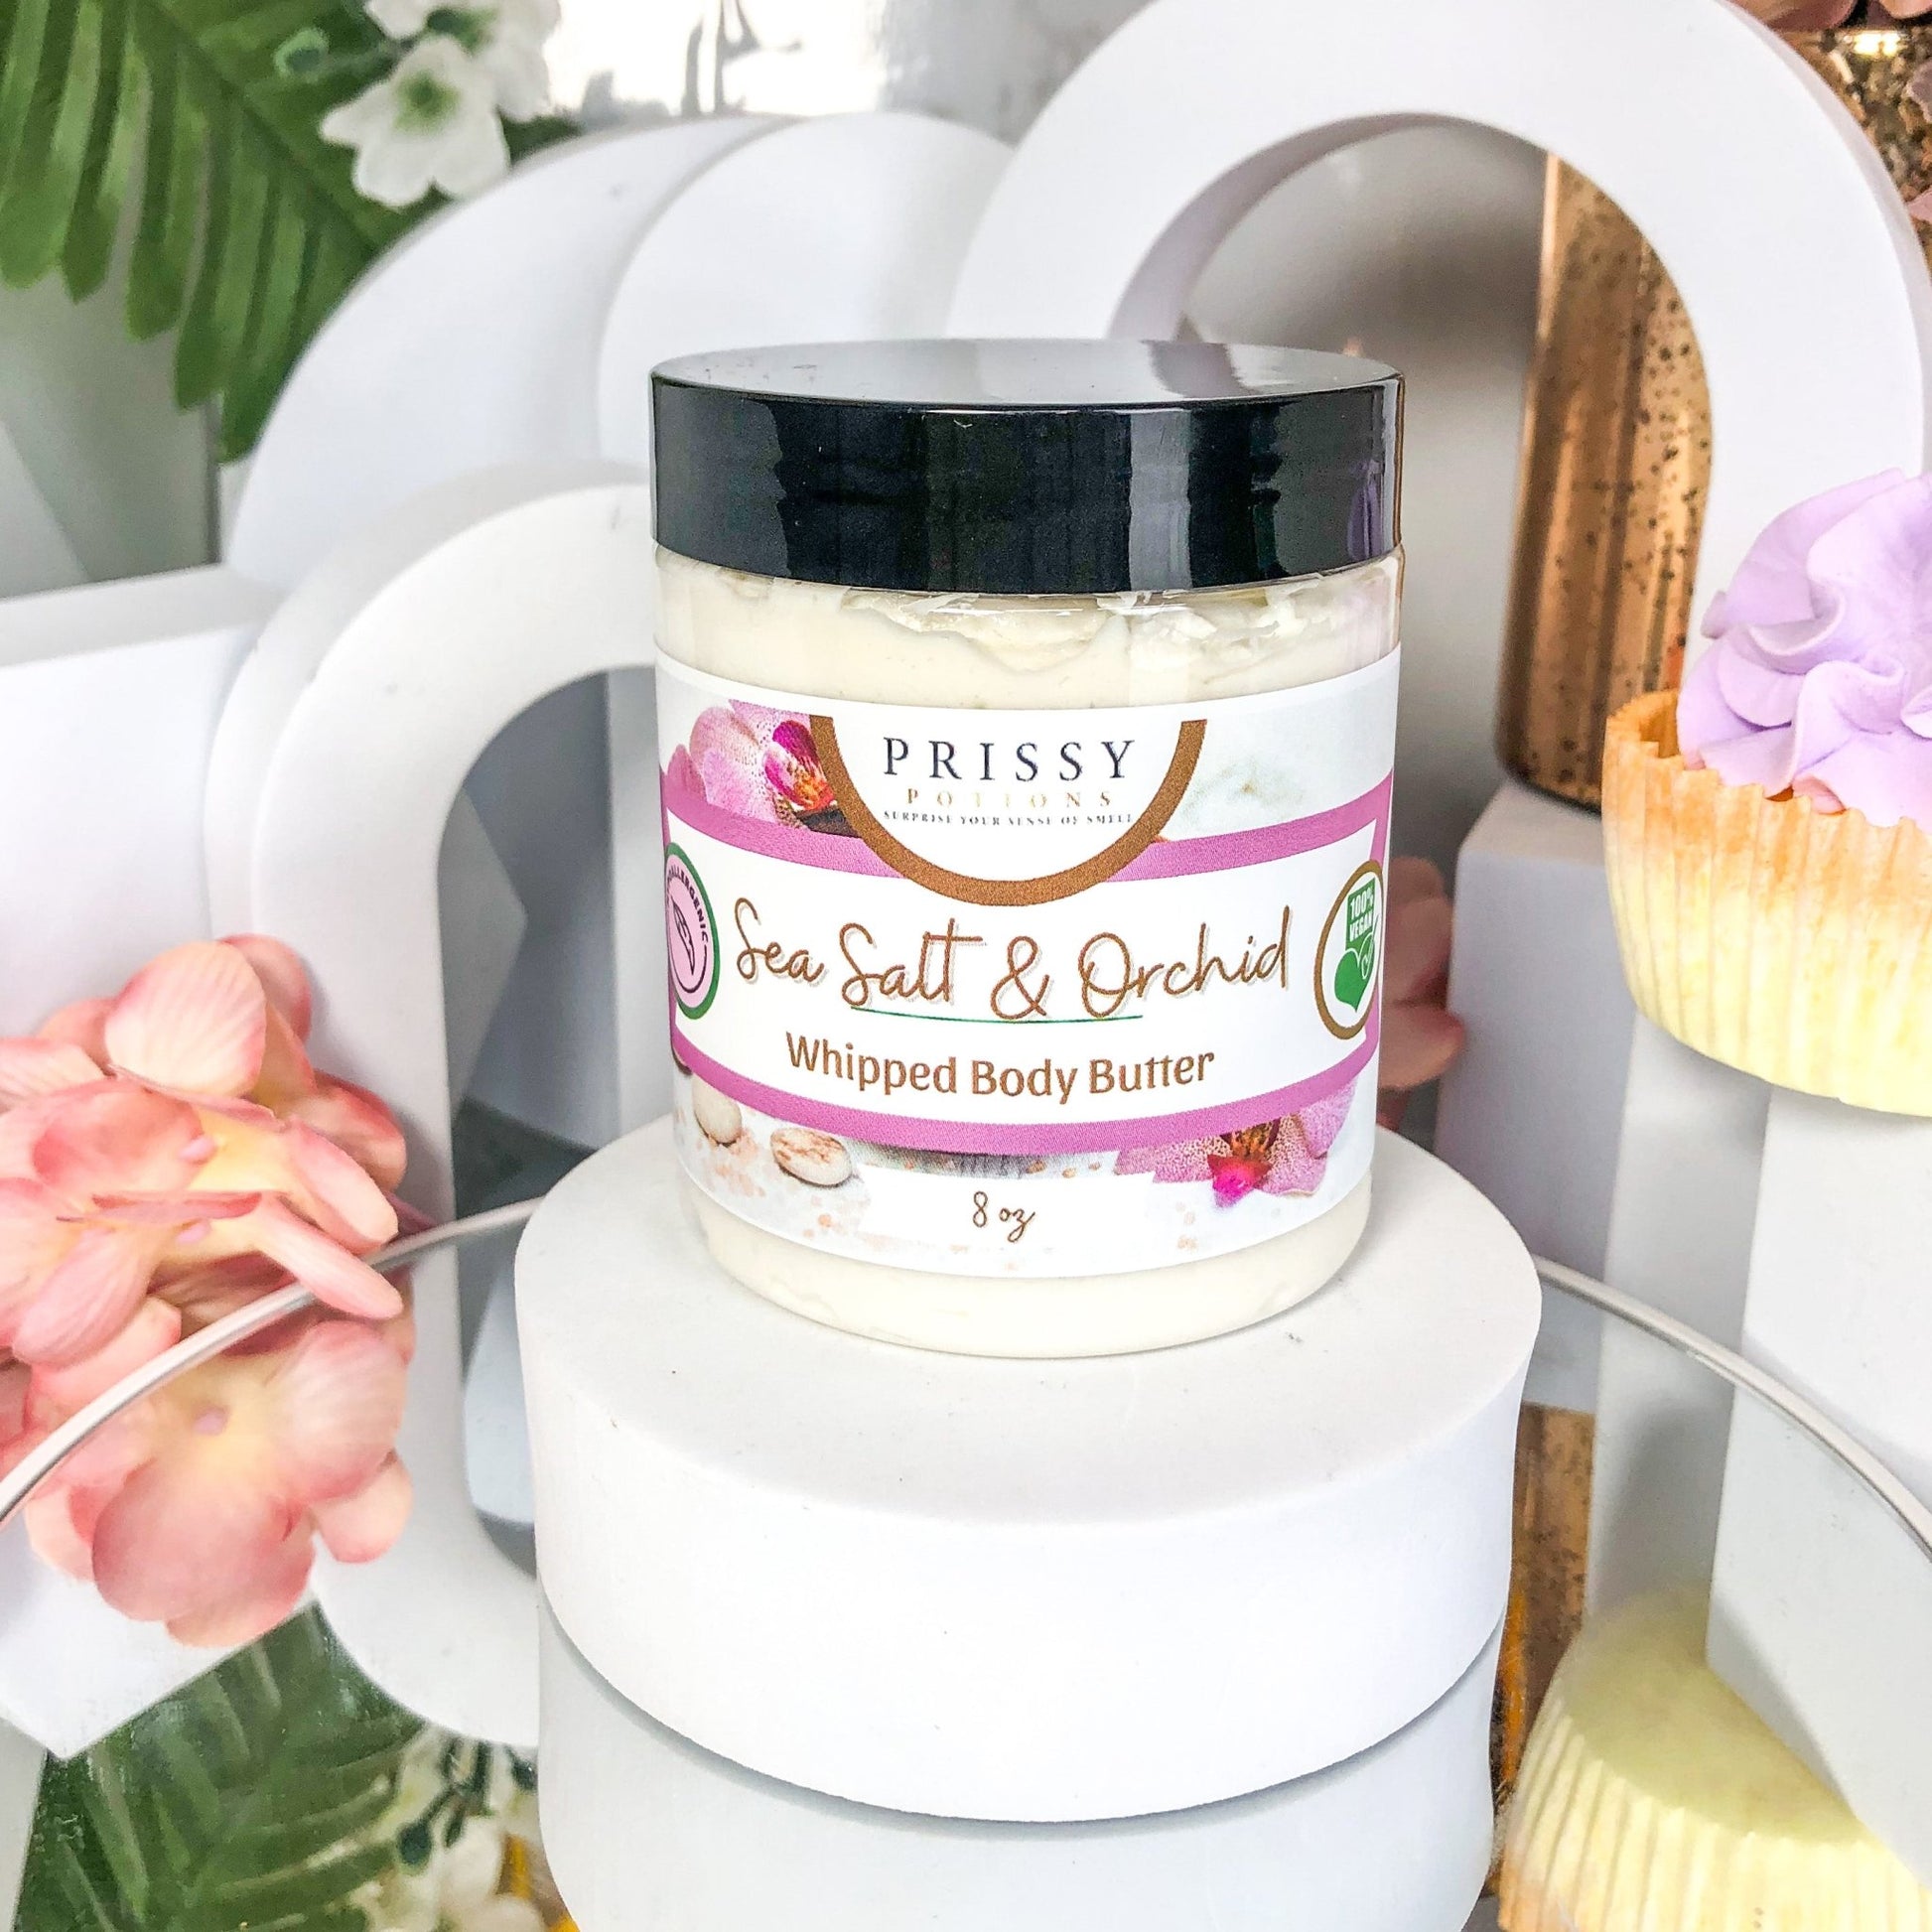 Sea Salt & Orchid Whipped Body Butter - Prissy Potions